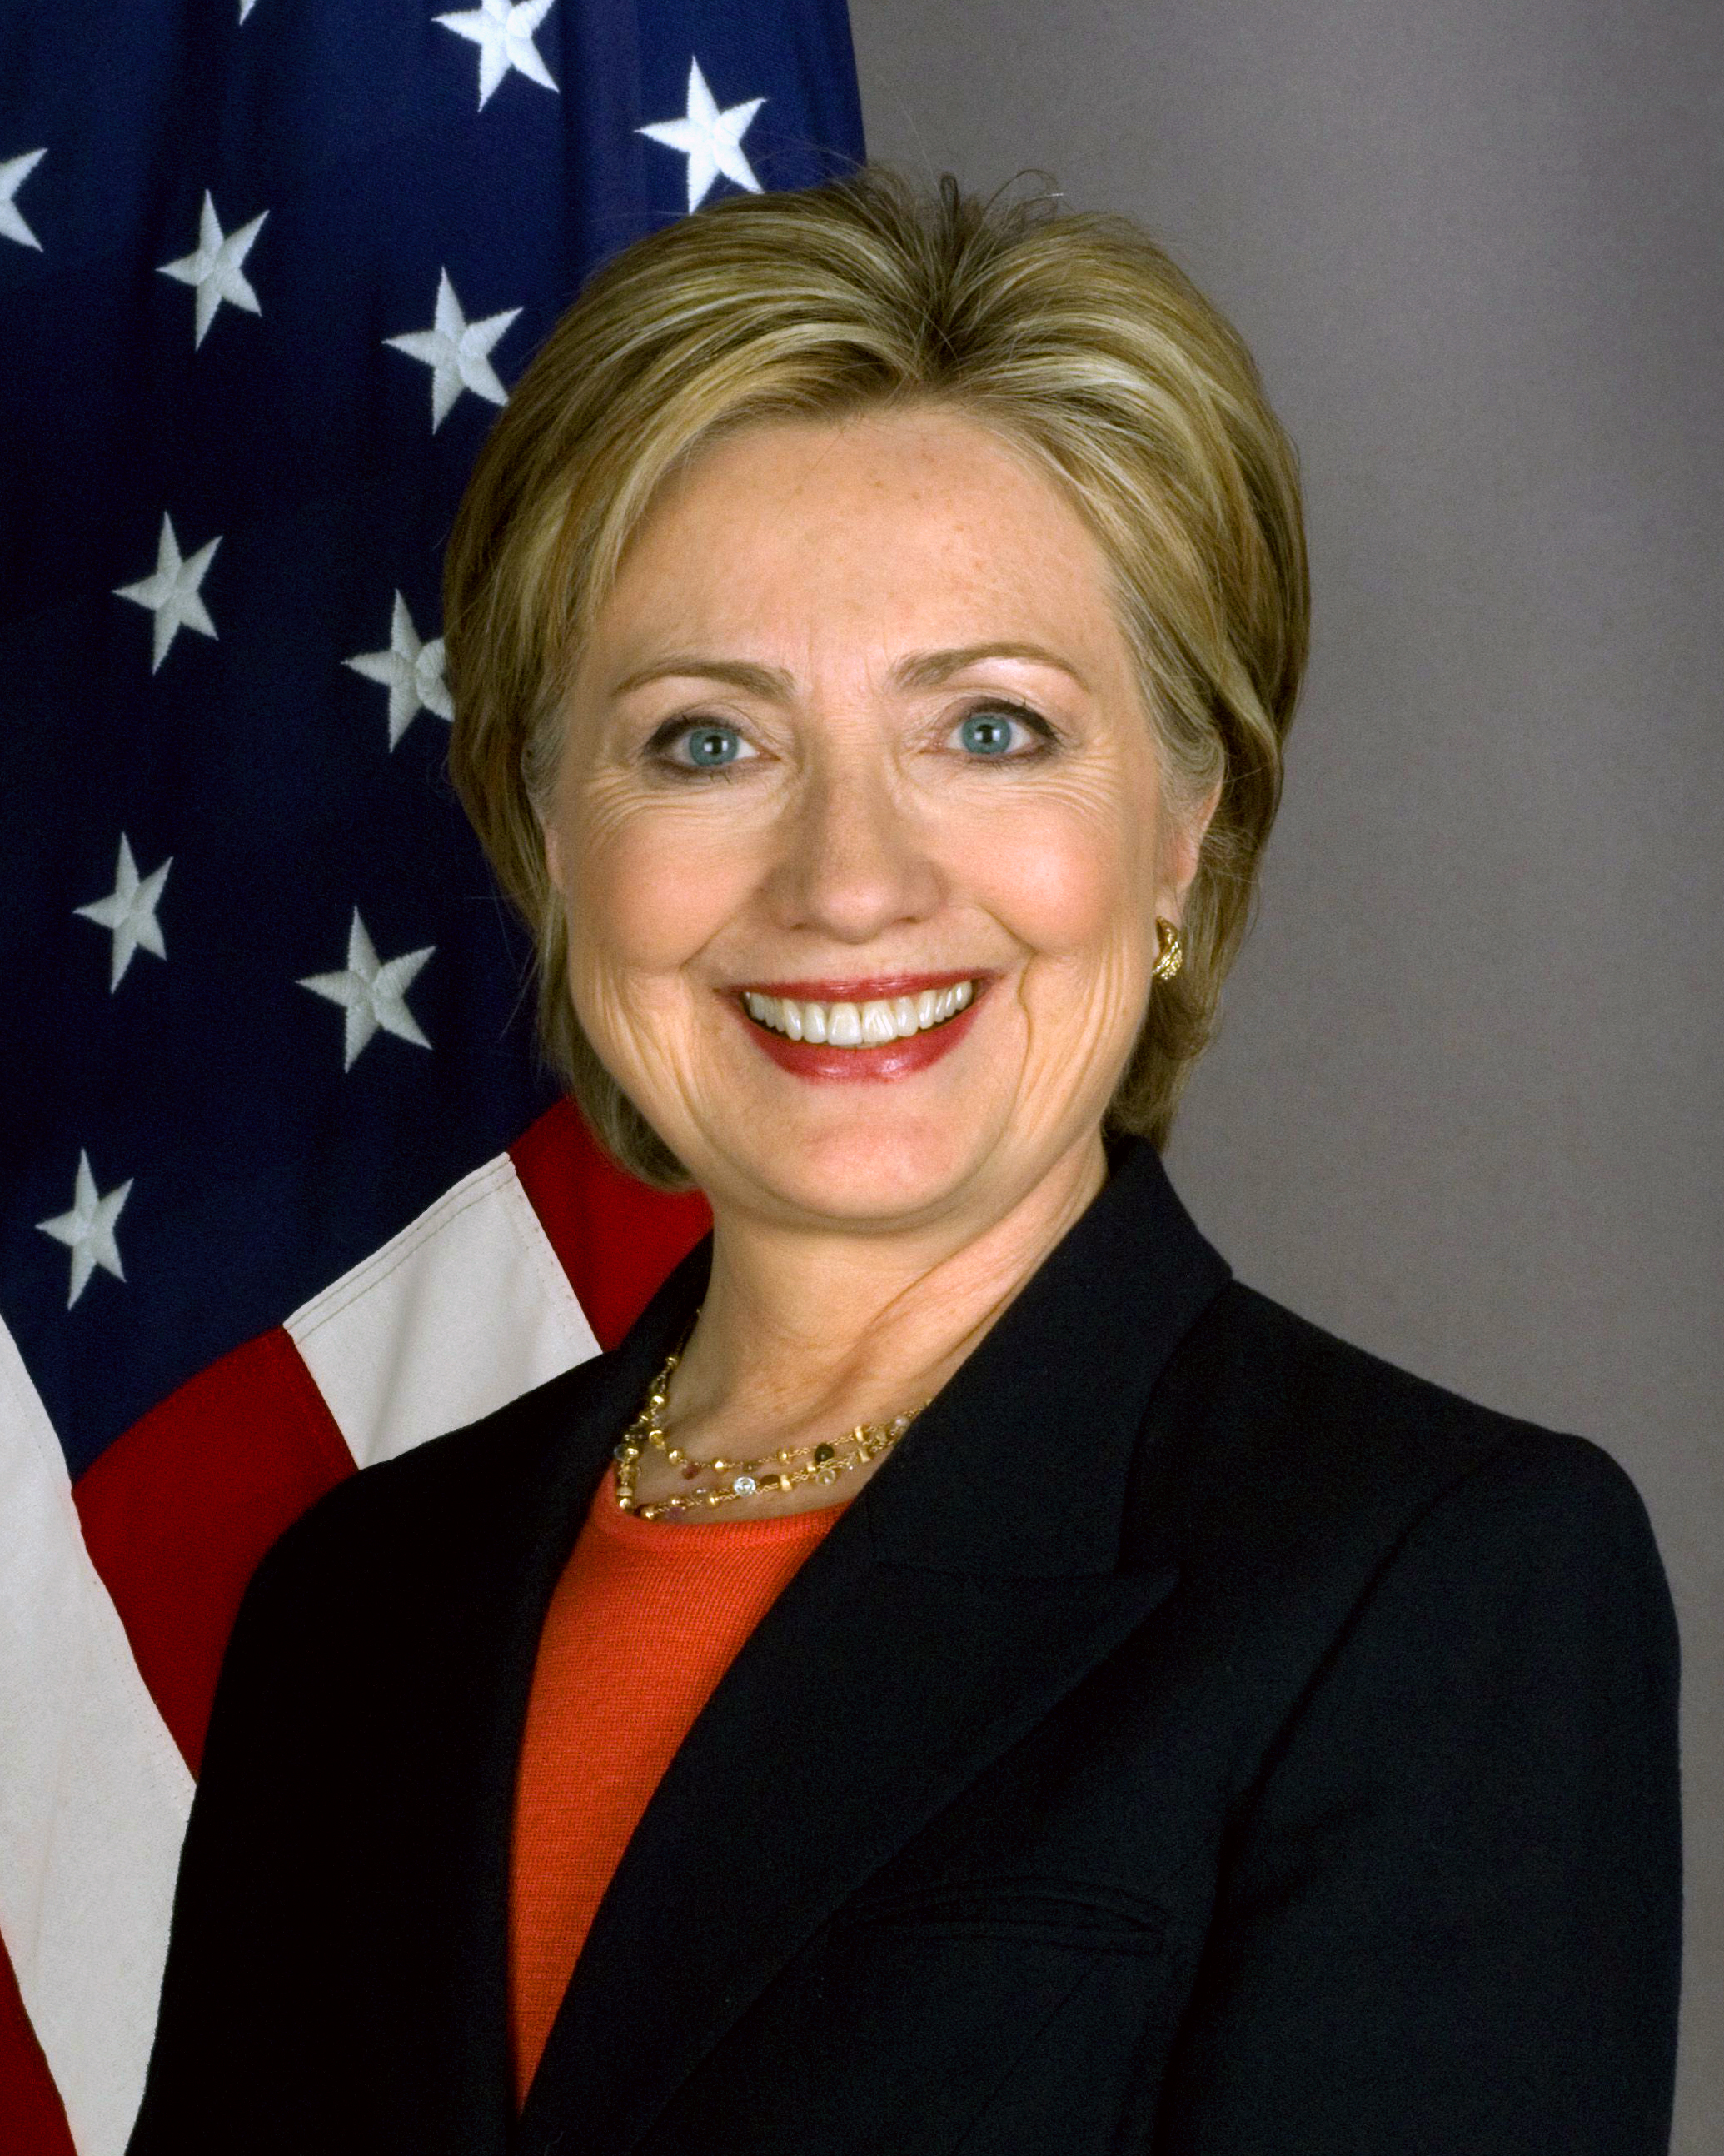 Hillary Clinton - Democrates candidate